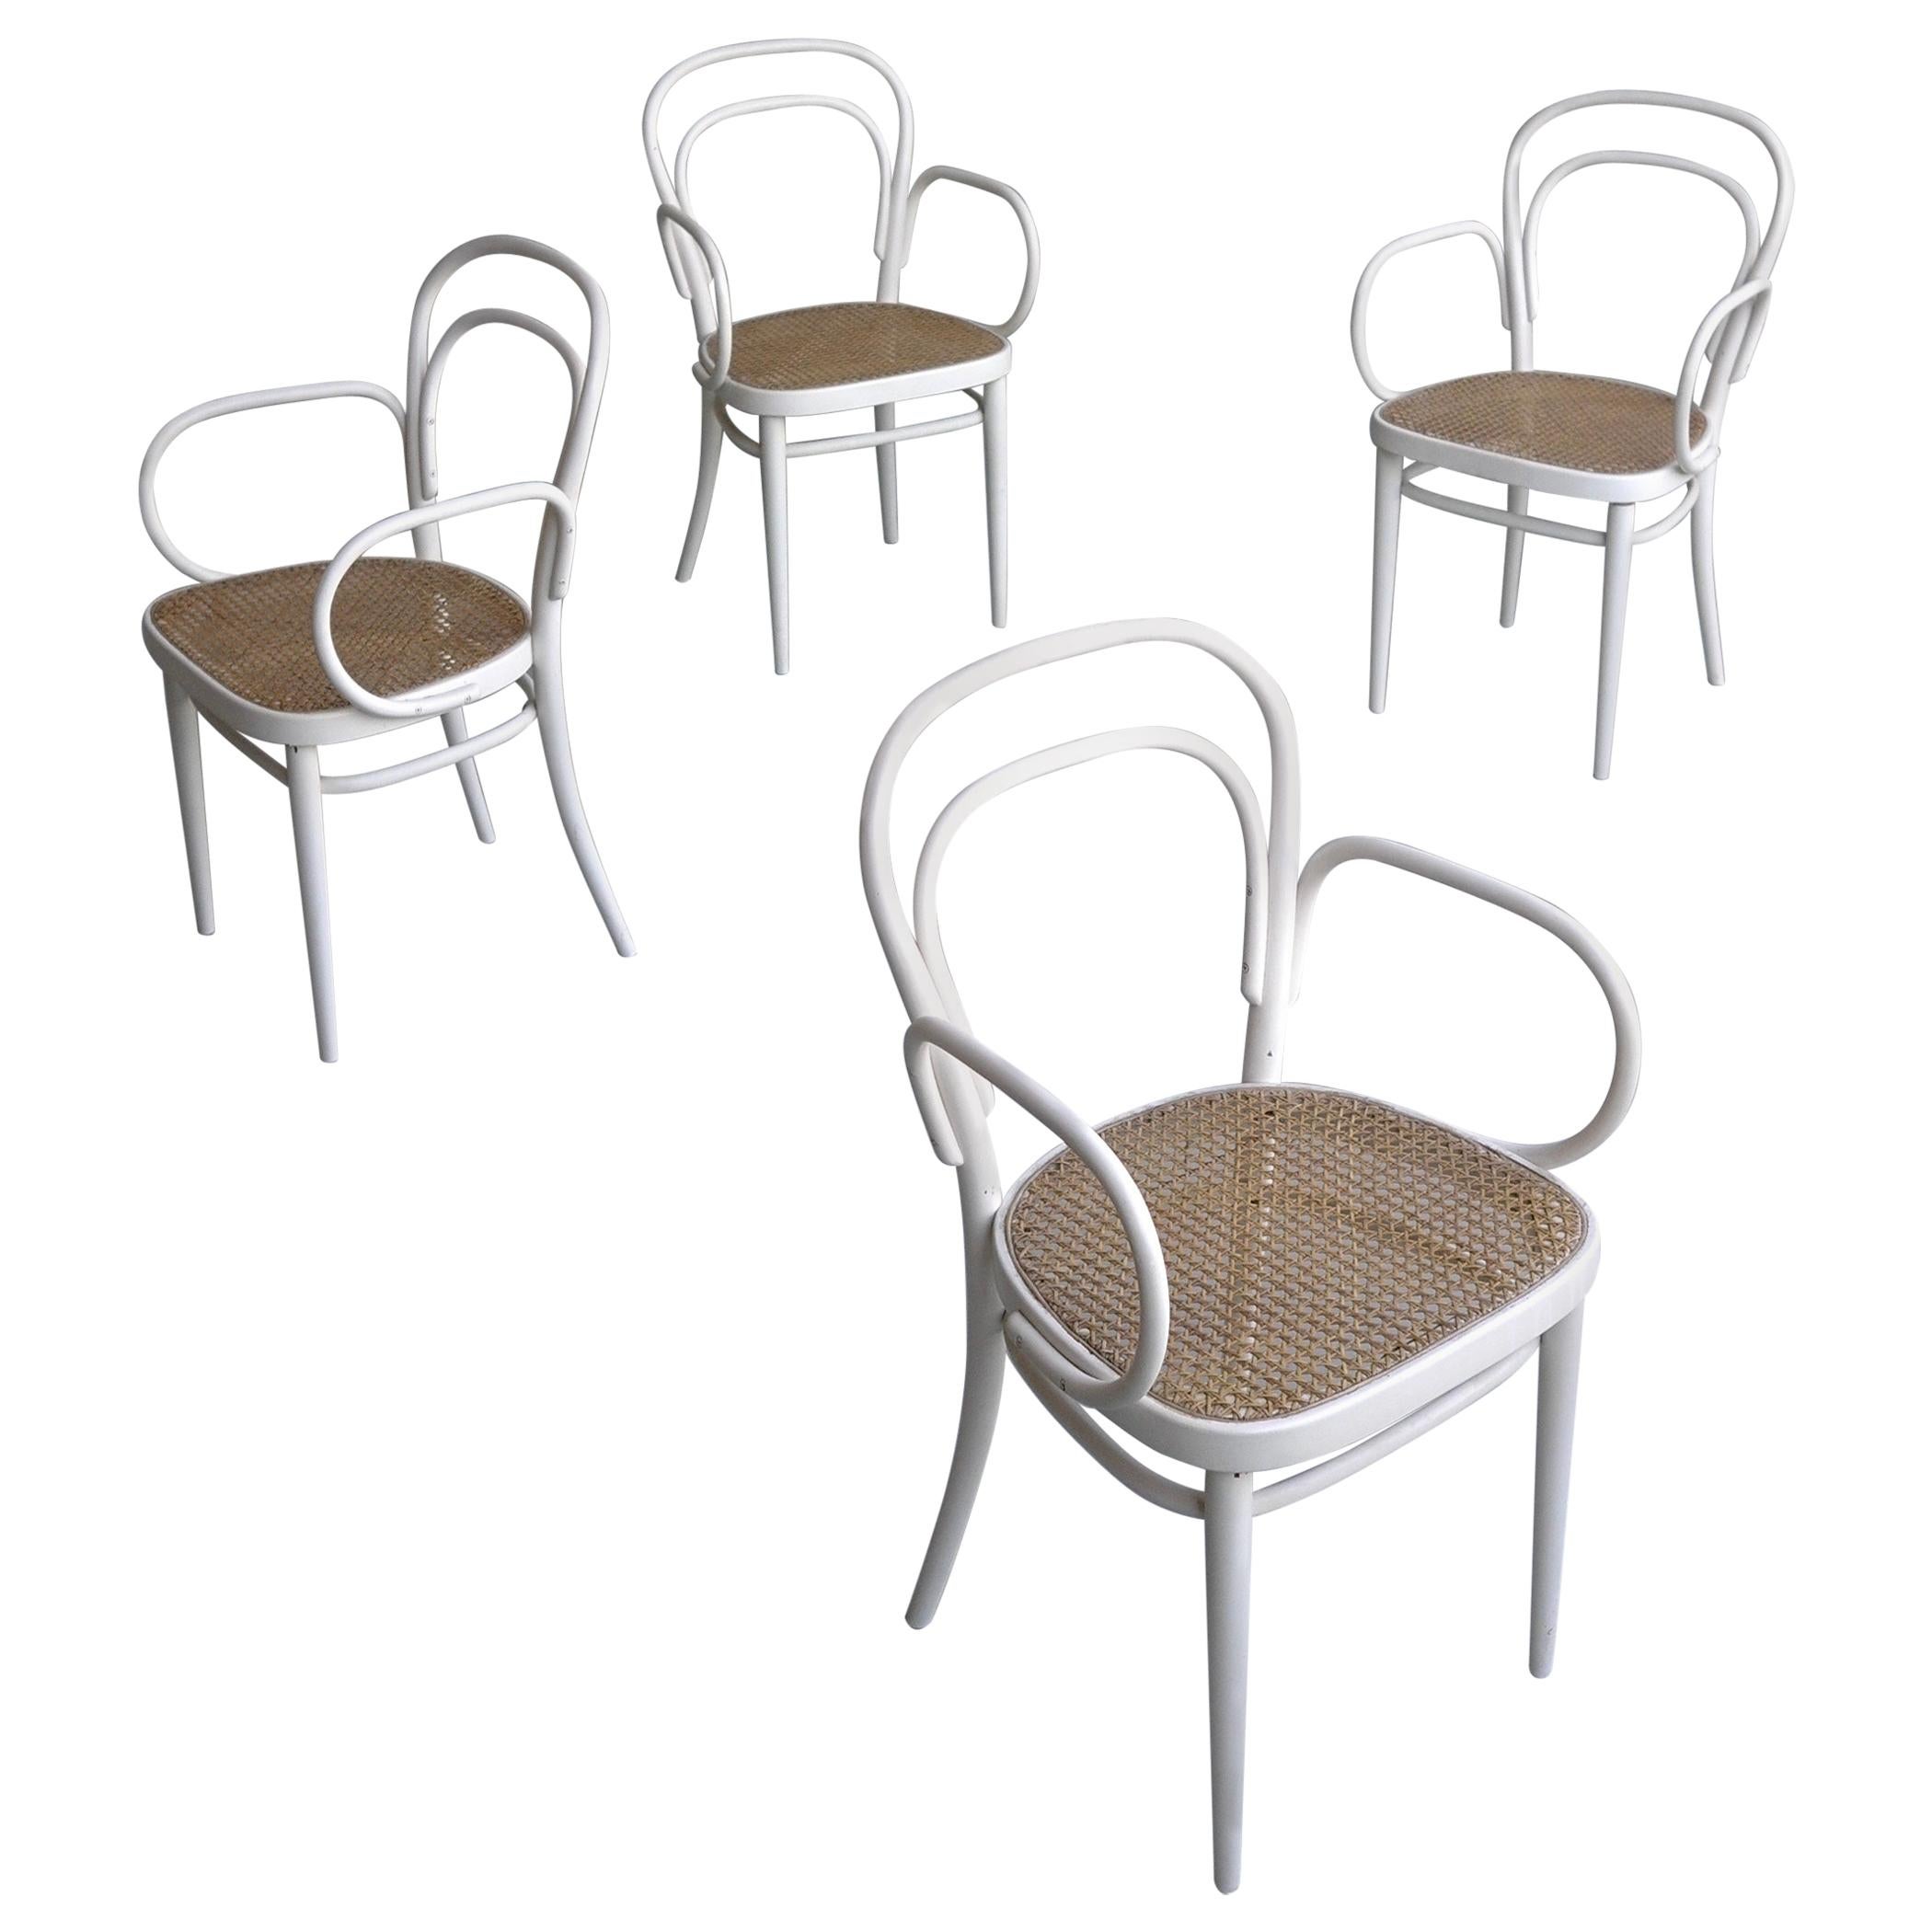 Set of Four White Thonet nr. 14 Armchairs with Wicker Seats, Vienna, 1960s